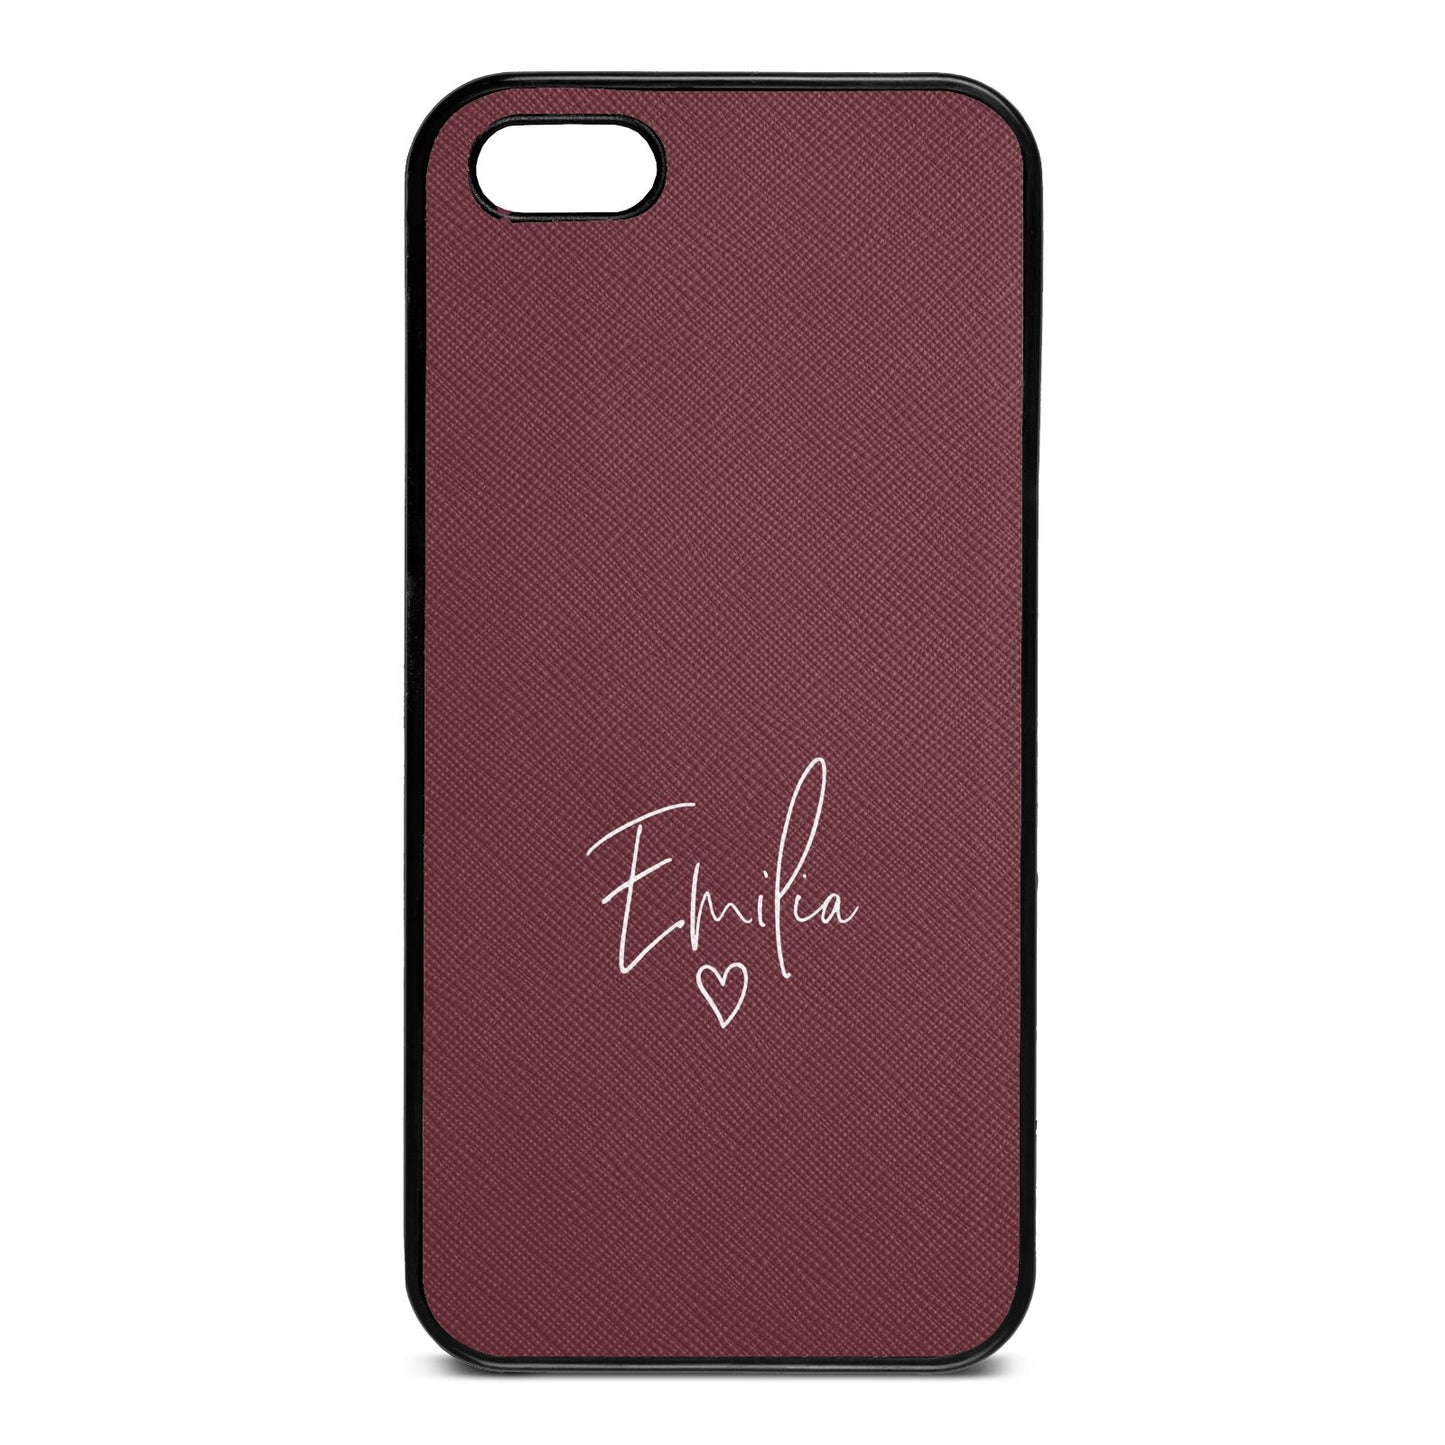 White Handwritten Name Transparent Rose Brown Saffiano Leather iPhone 5 Case